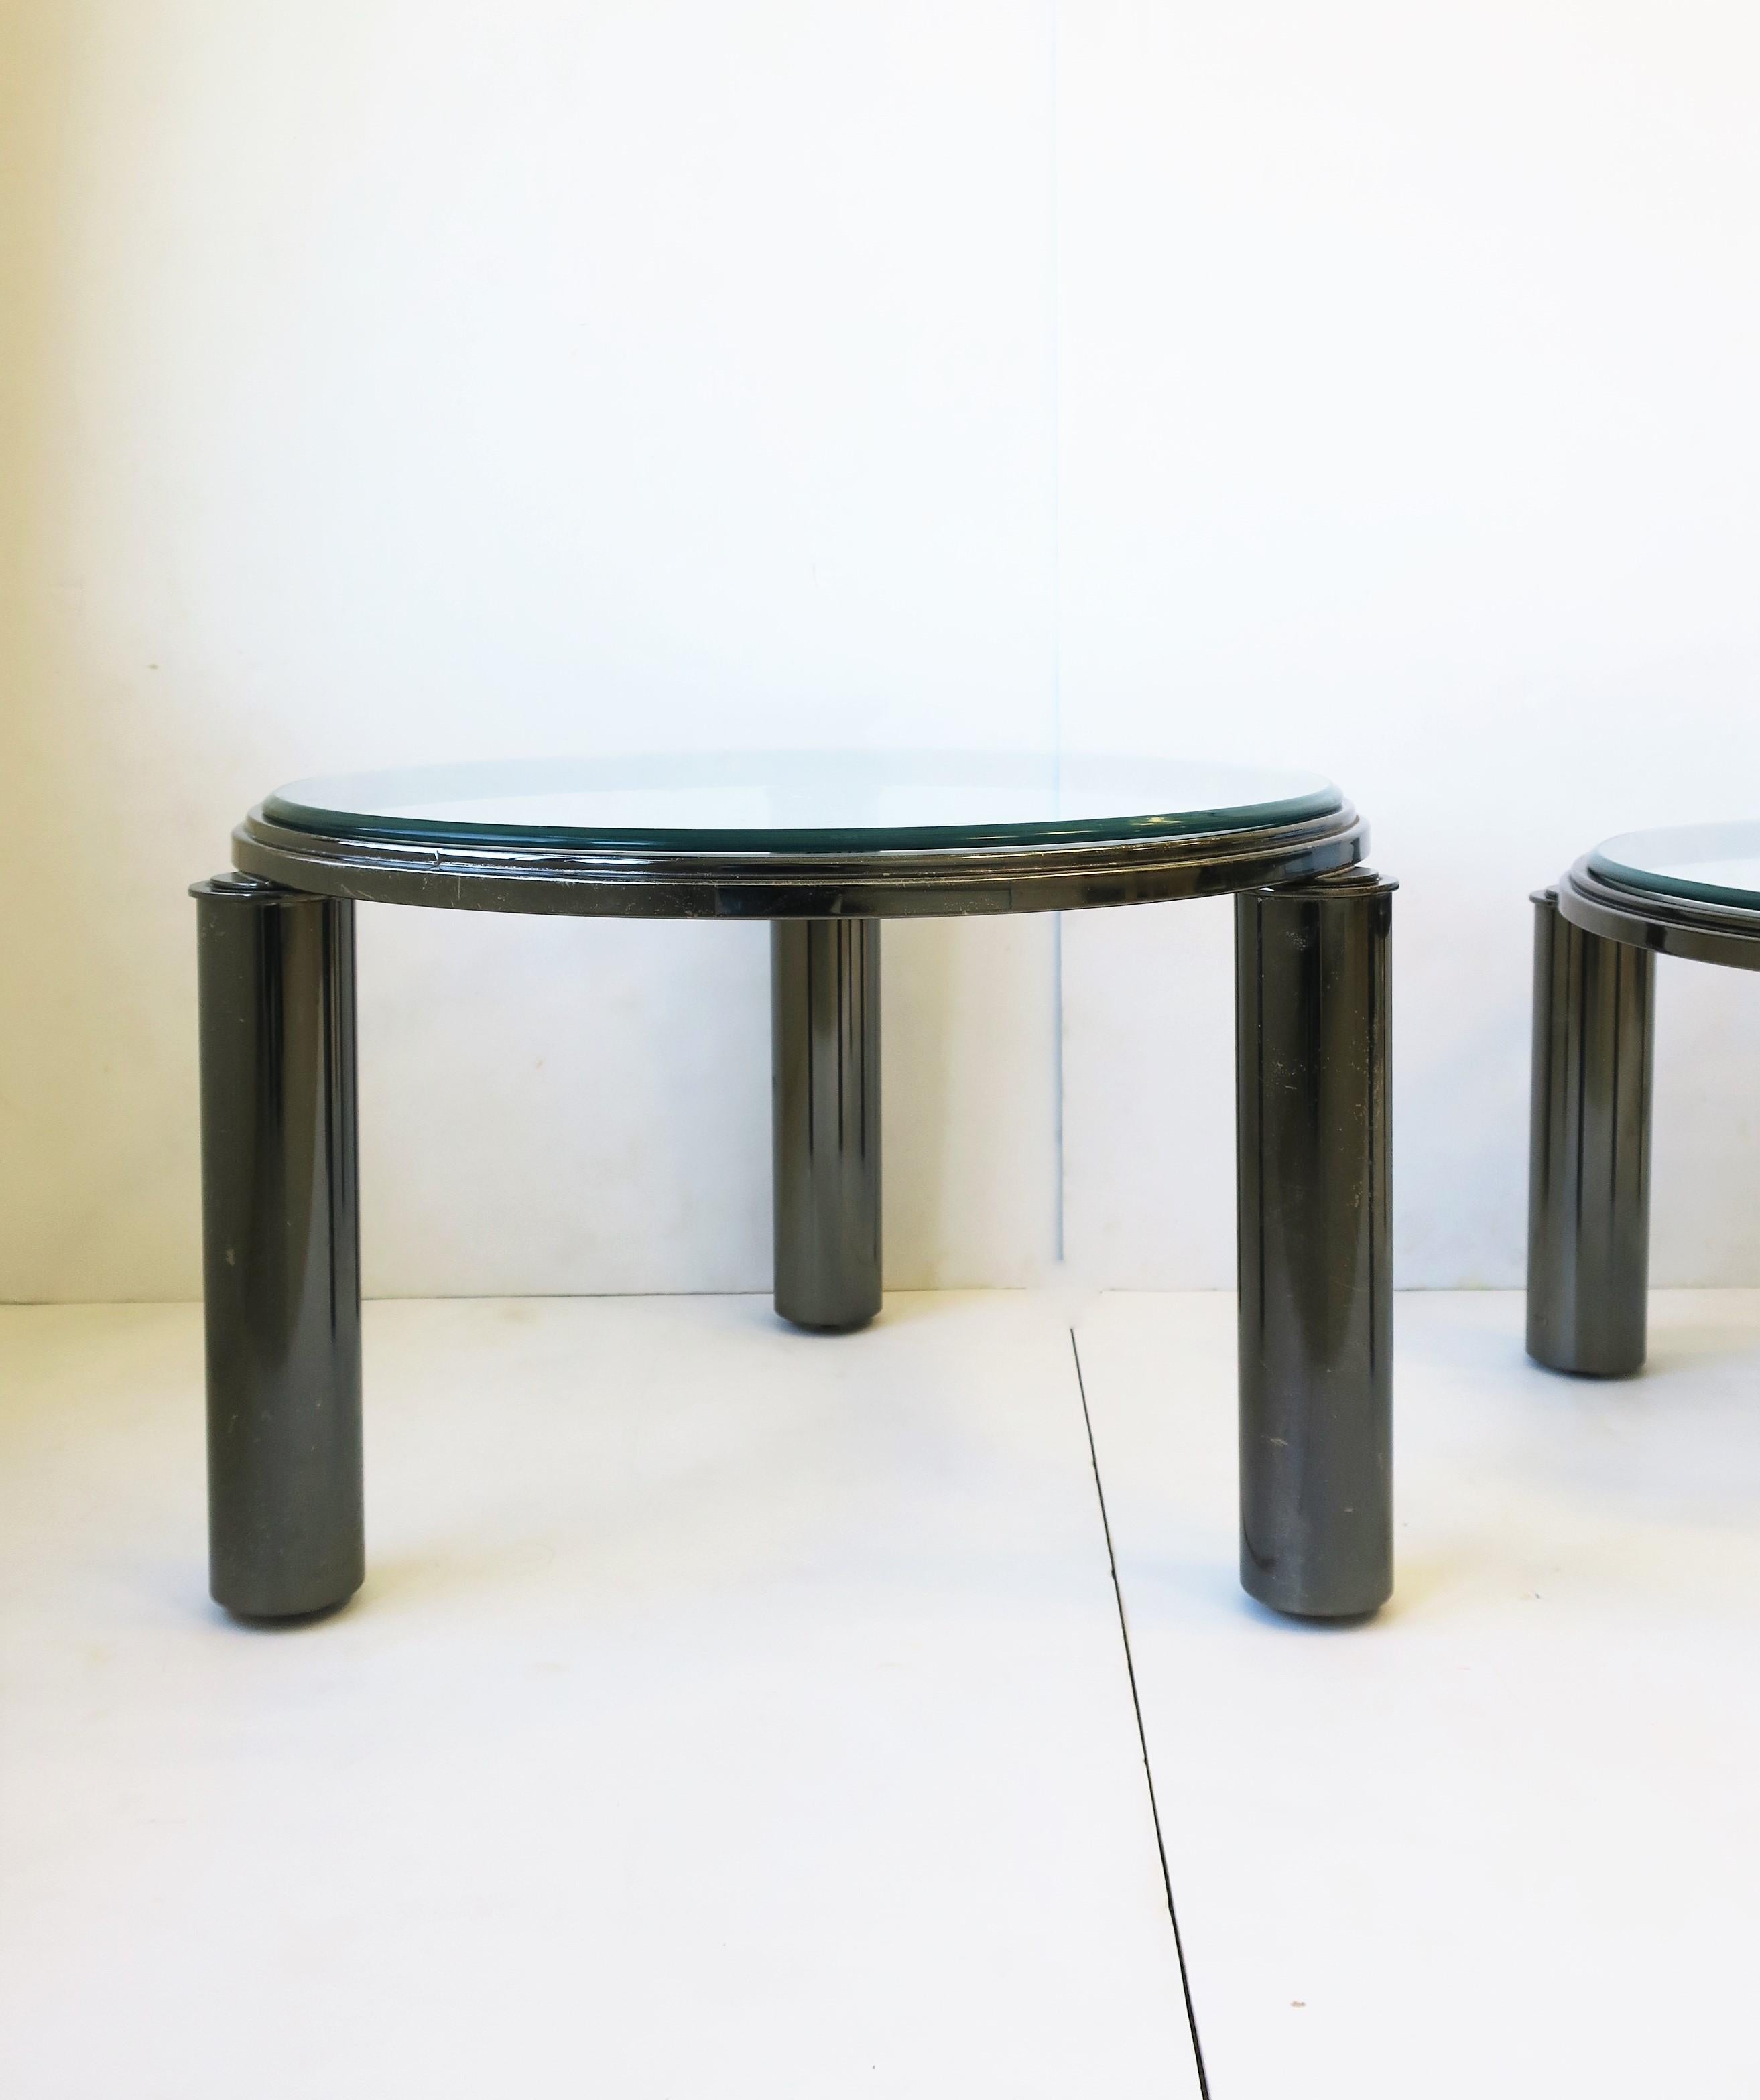 American Postmodern Smoked Charcoal Chrome & Glass Cocktail Tables by DIA, '90s, Set of 2 For Sale